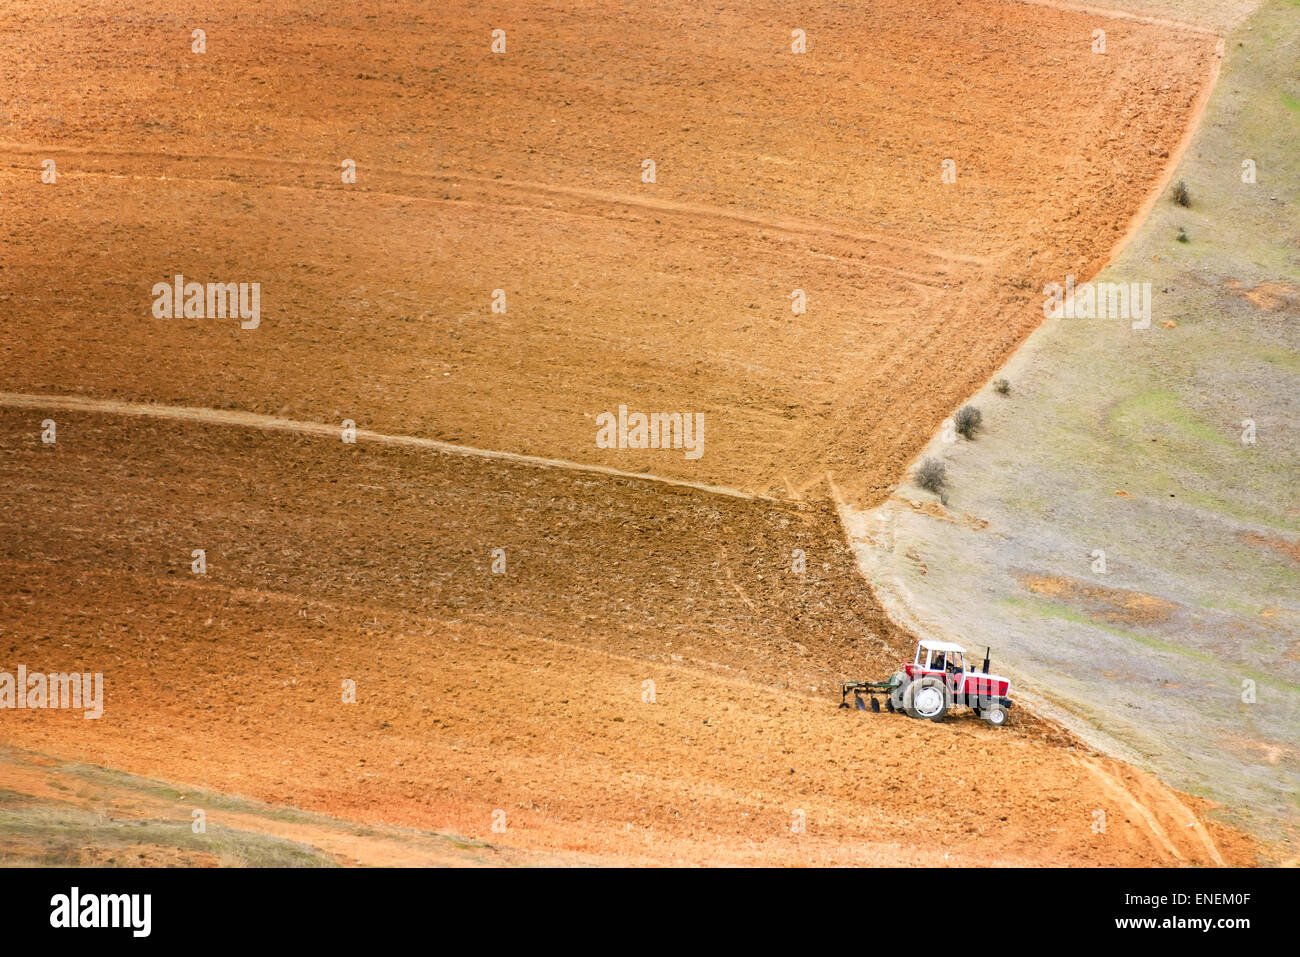 Tractor plowing a large field near Concepcion, Peru Stock Photo